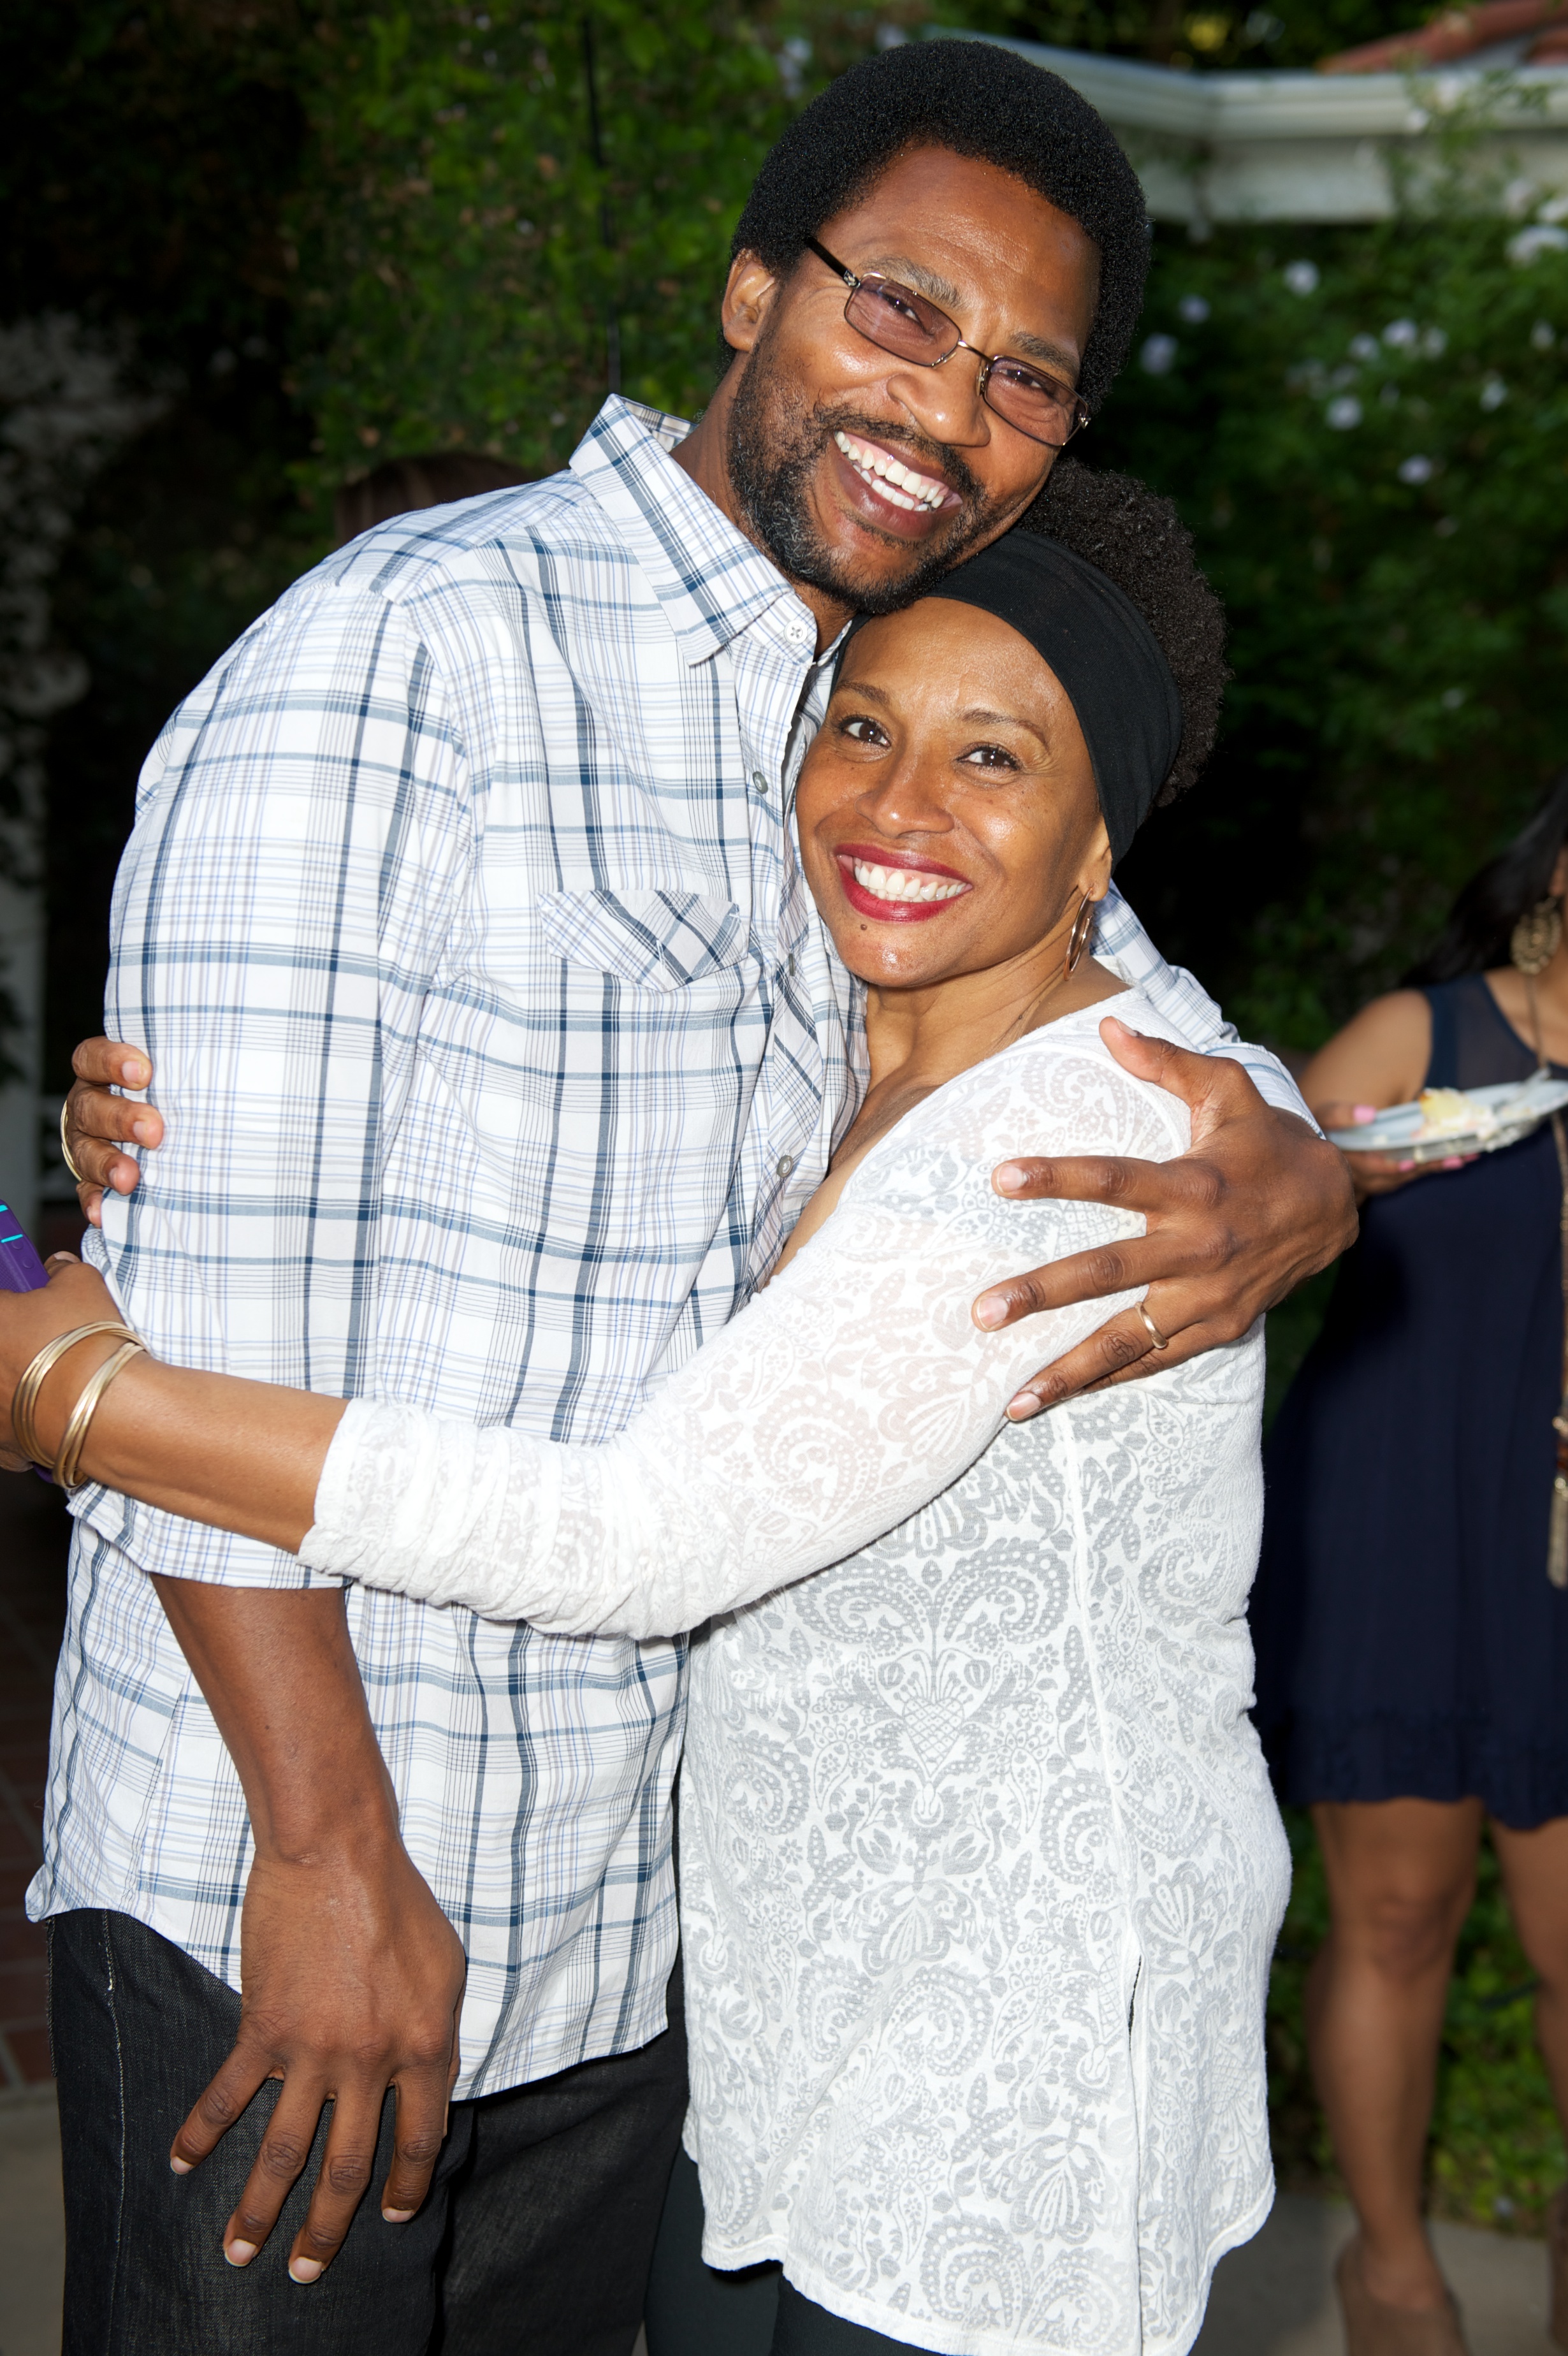 Arnold Byrd and Jenifer Lewis attend Niecy Nash's first wedding anniversary celebration on May 27, 2012, in Northridge, California. | Source: Getty Images